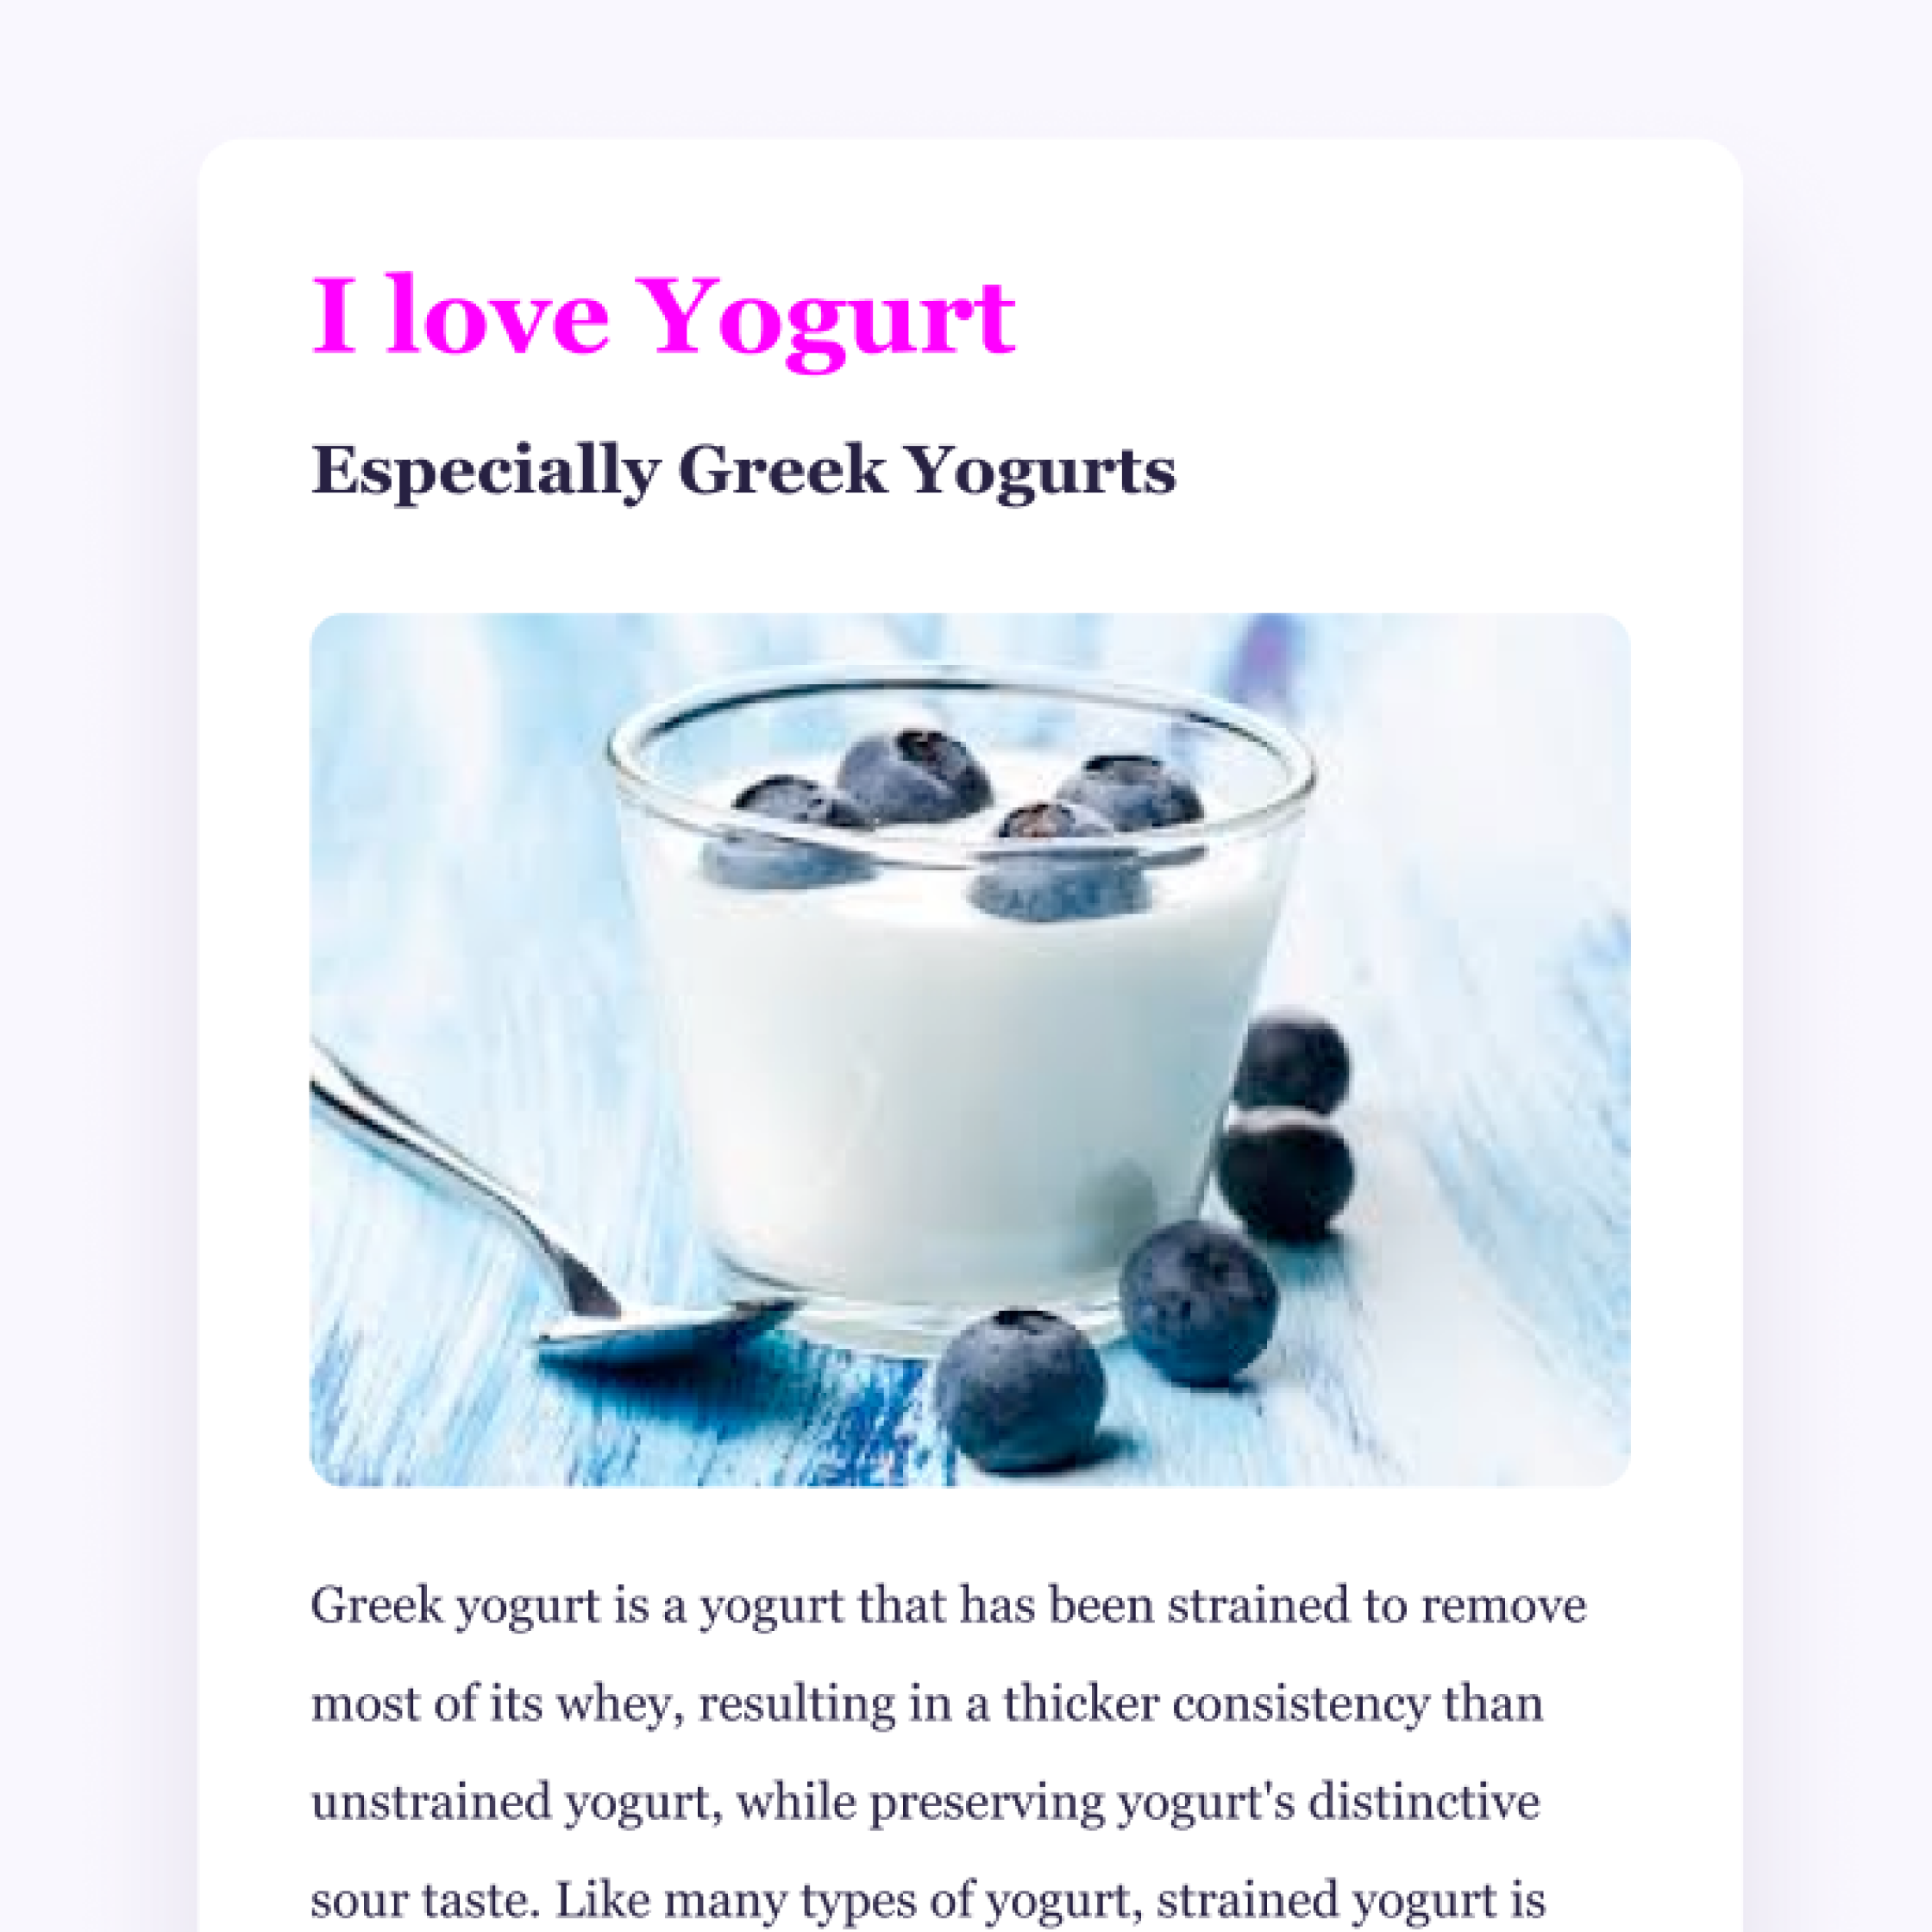 Picture of the referred yogurt app